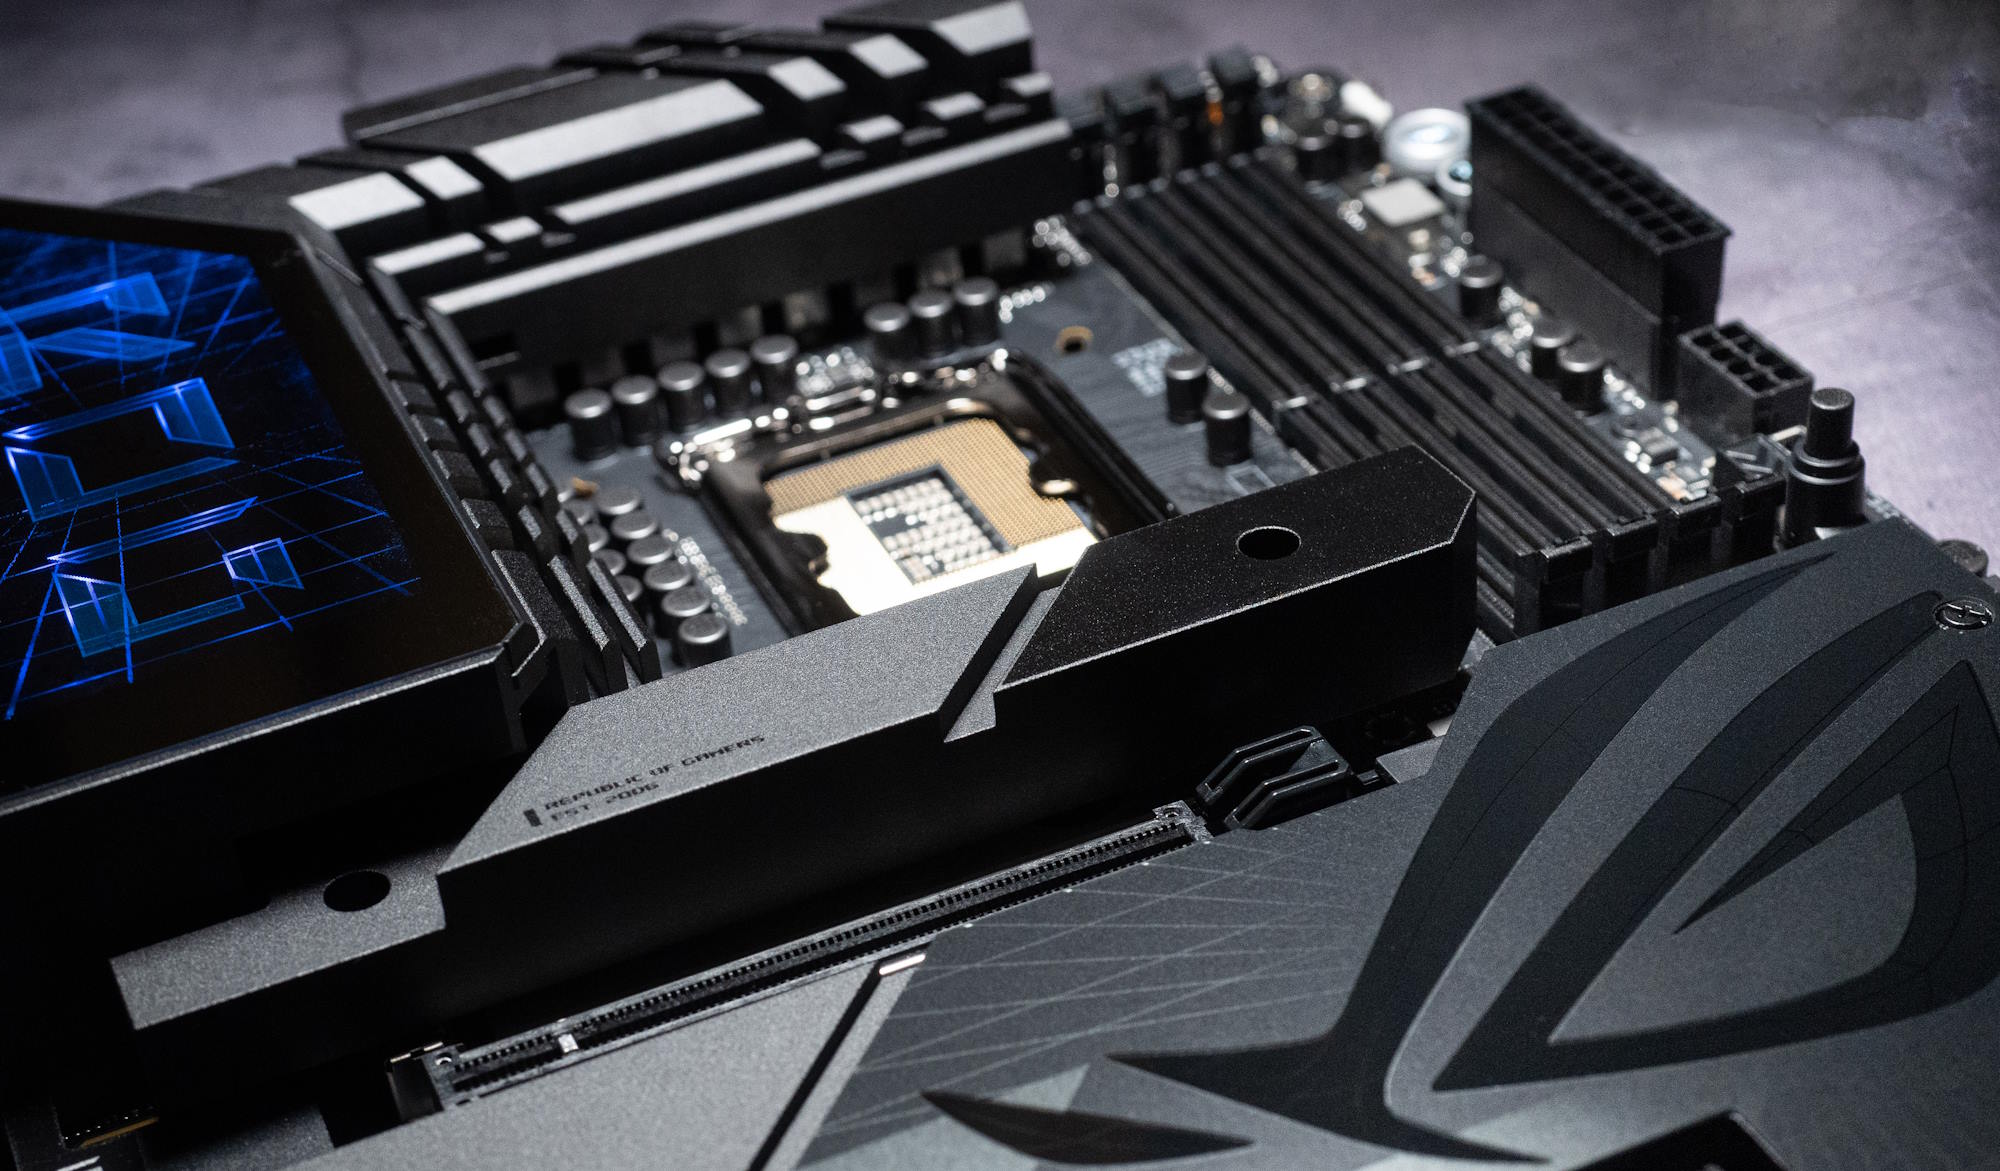 The PCIe 5.0 M.2 slot, covered with a dedicated heatsink, on the ROG Maximus Z790 Dark Hero motherboard